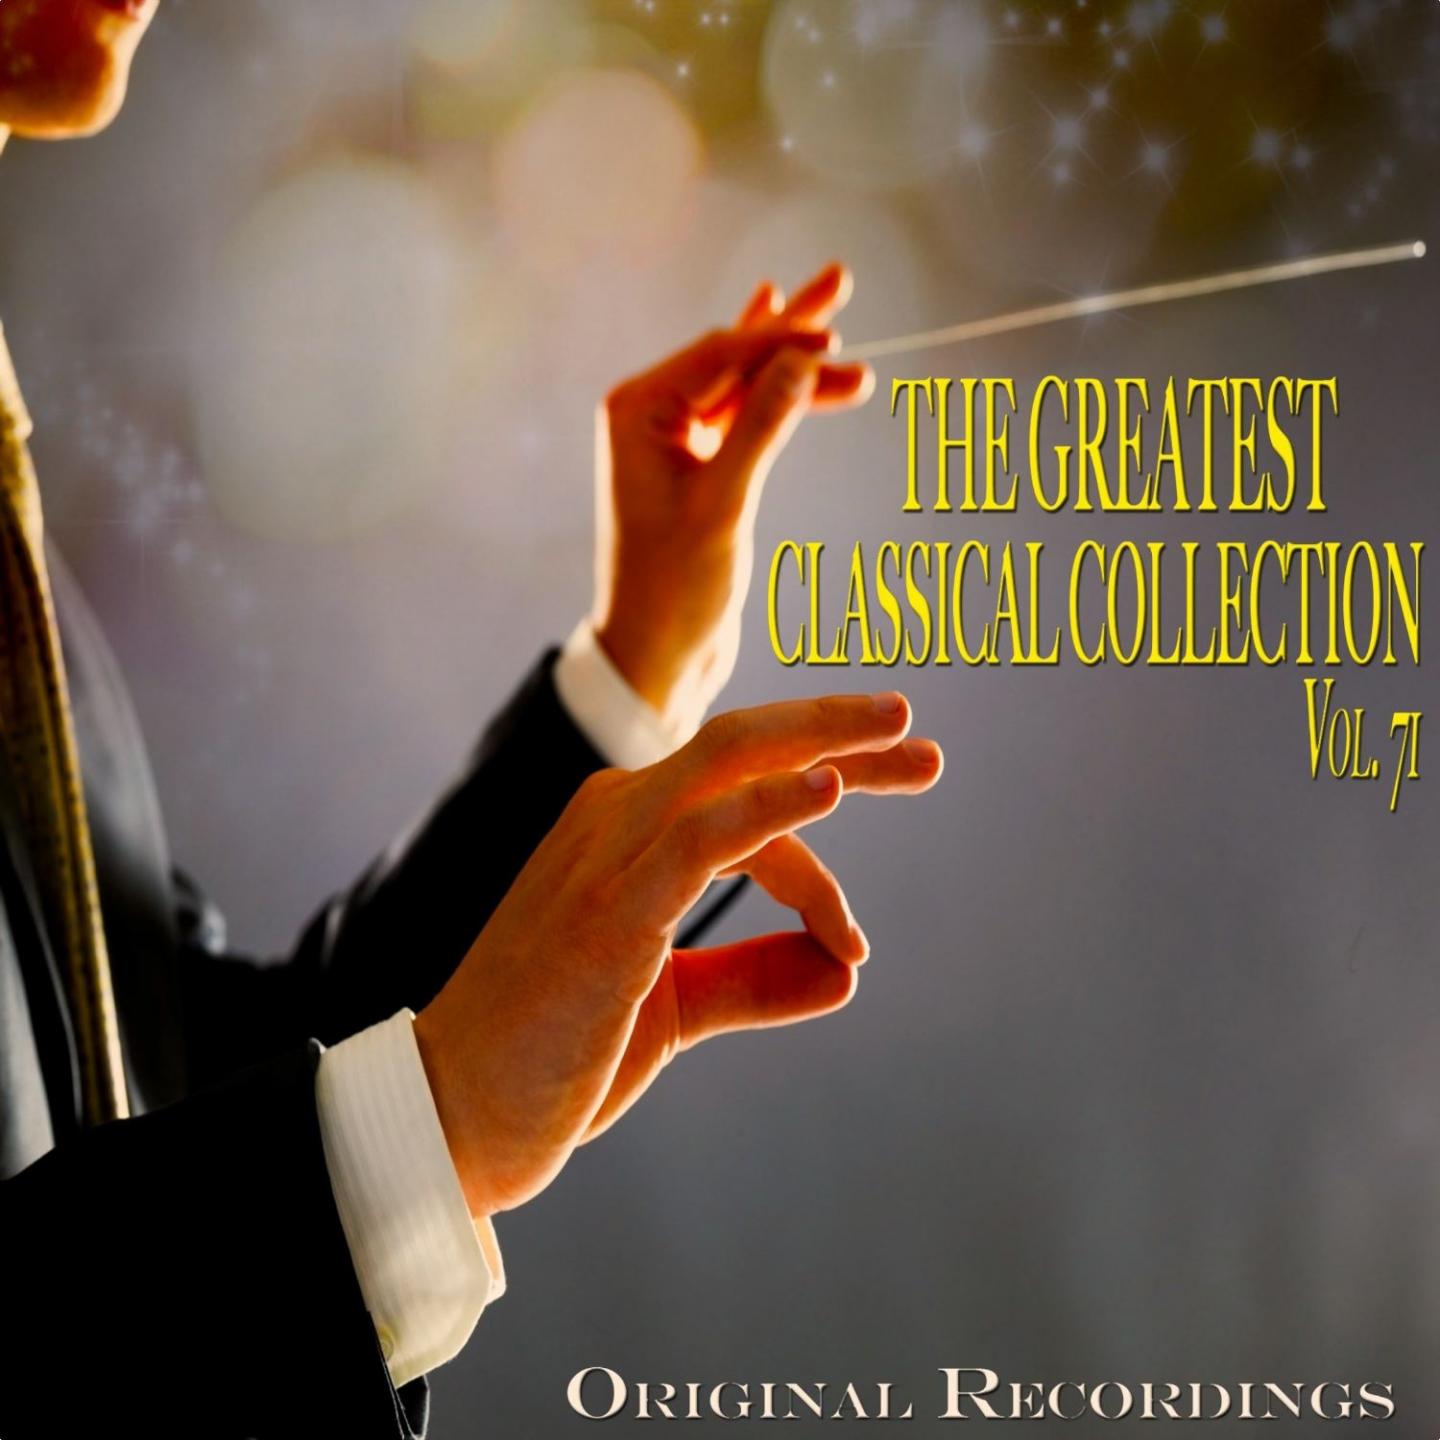 The Greatest Classical Collection Vol. 71